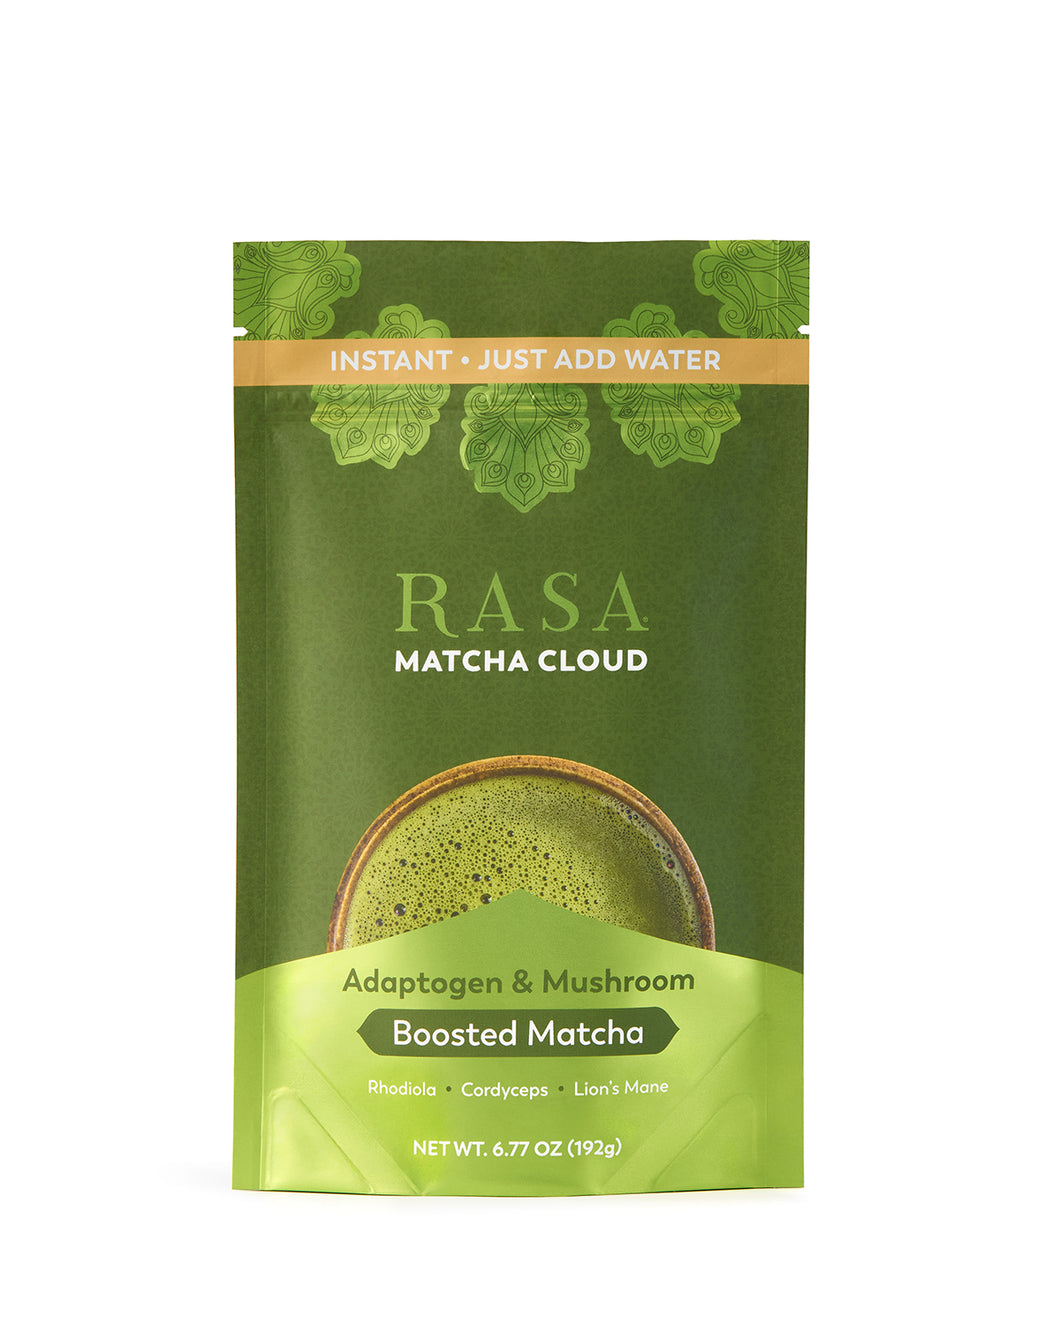 Matcha Cloud 6oz - Case of 6 - Just Add Water!